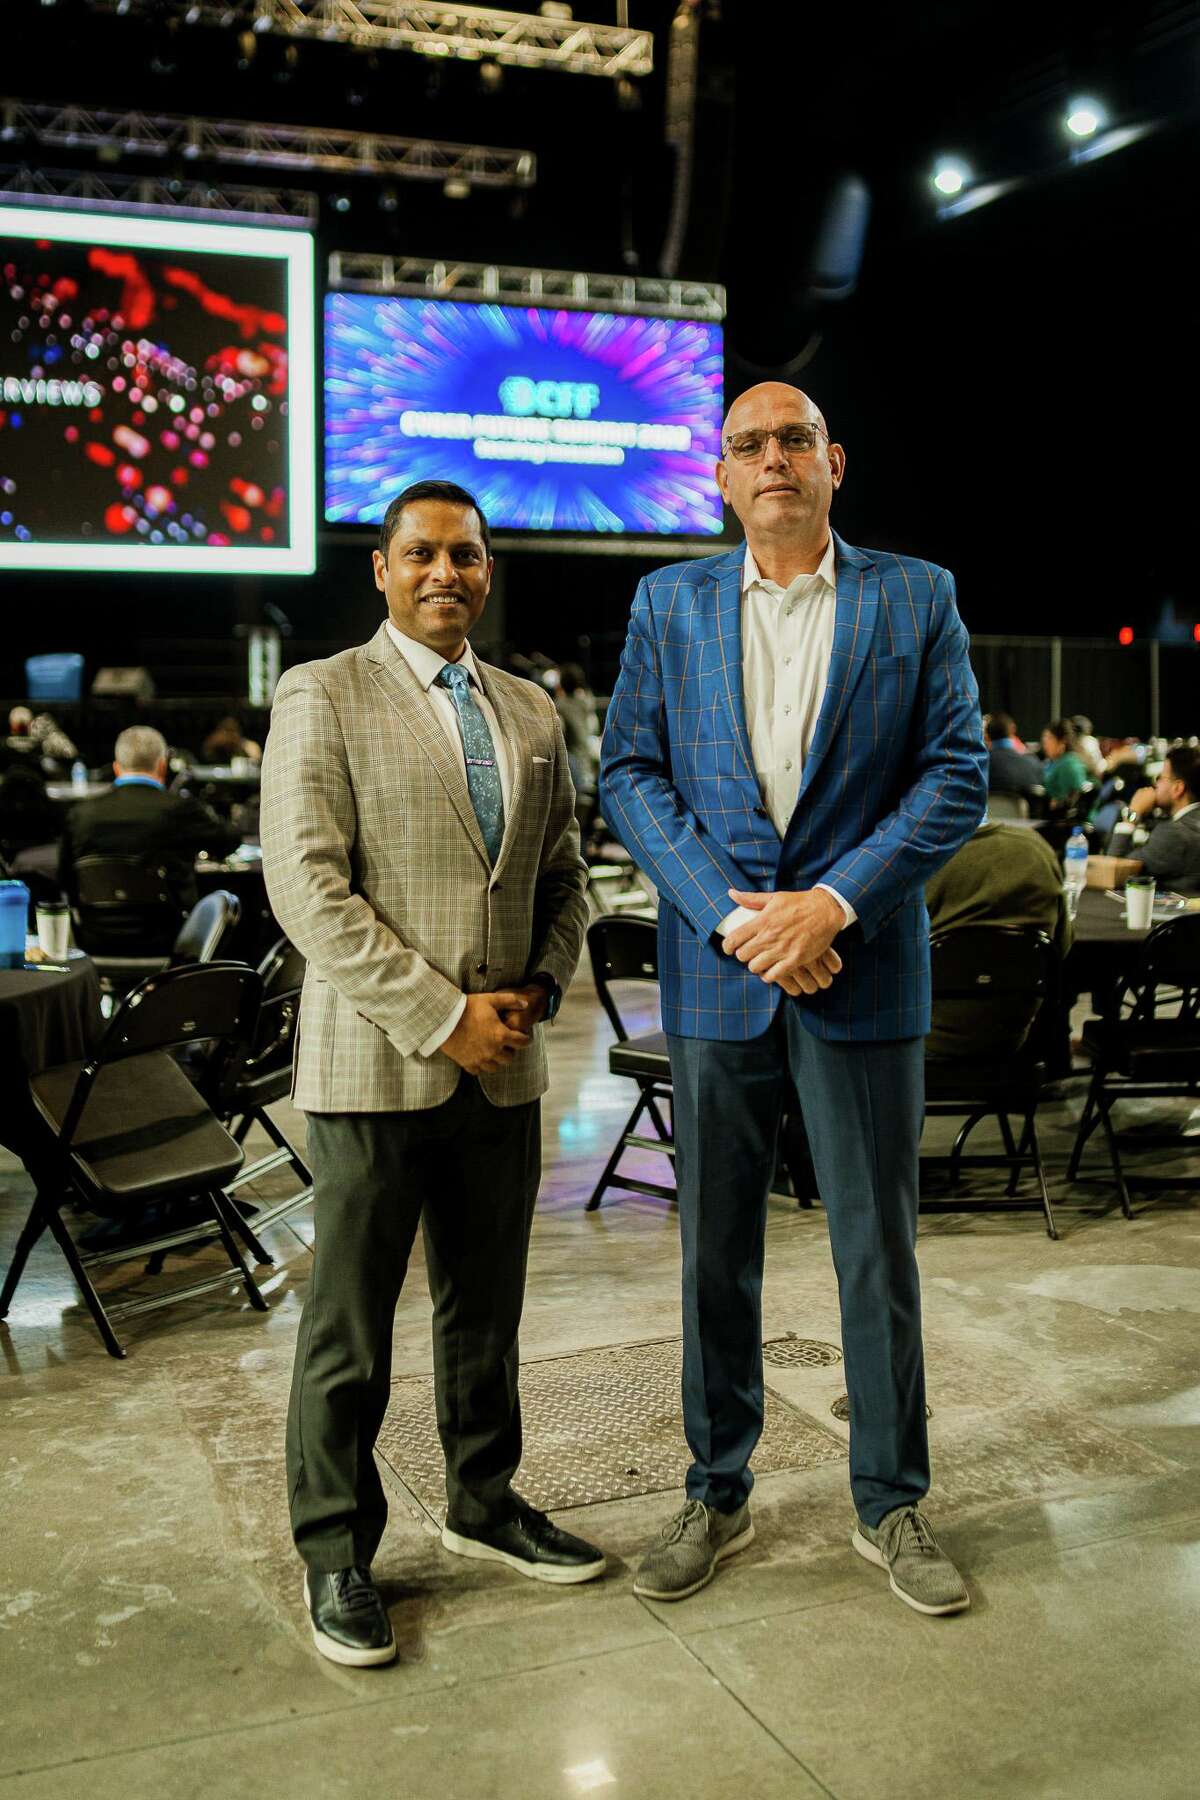 Valmiki Mukherjee - left, founder and chair of the Dallas-based Cyber Future Foundation, the organization that brought the Cyber Future Summit 2022 to Port San Antonio for the first time in October - stands with DeLorean Motor Co. CEO Joost de Vries during the conference.